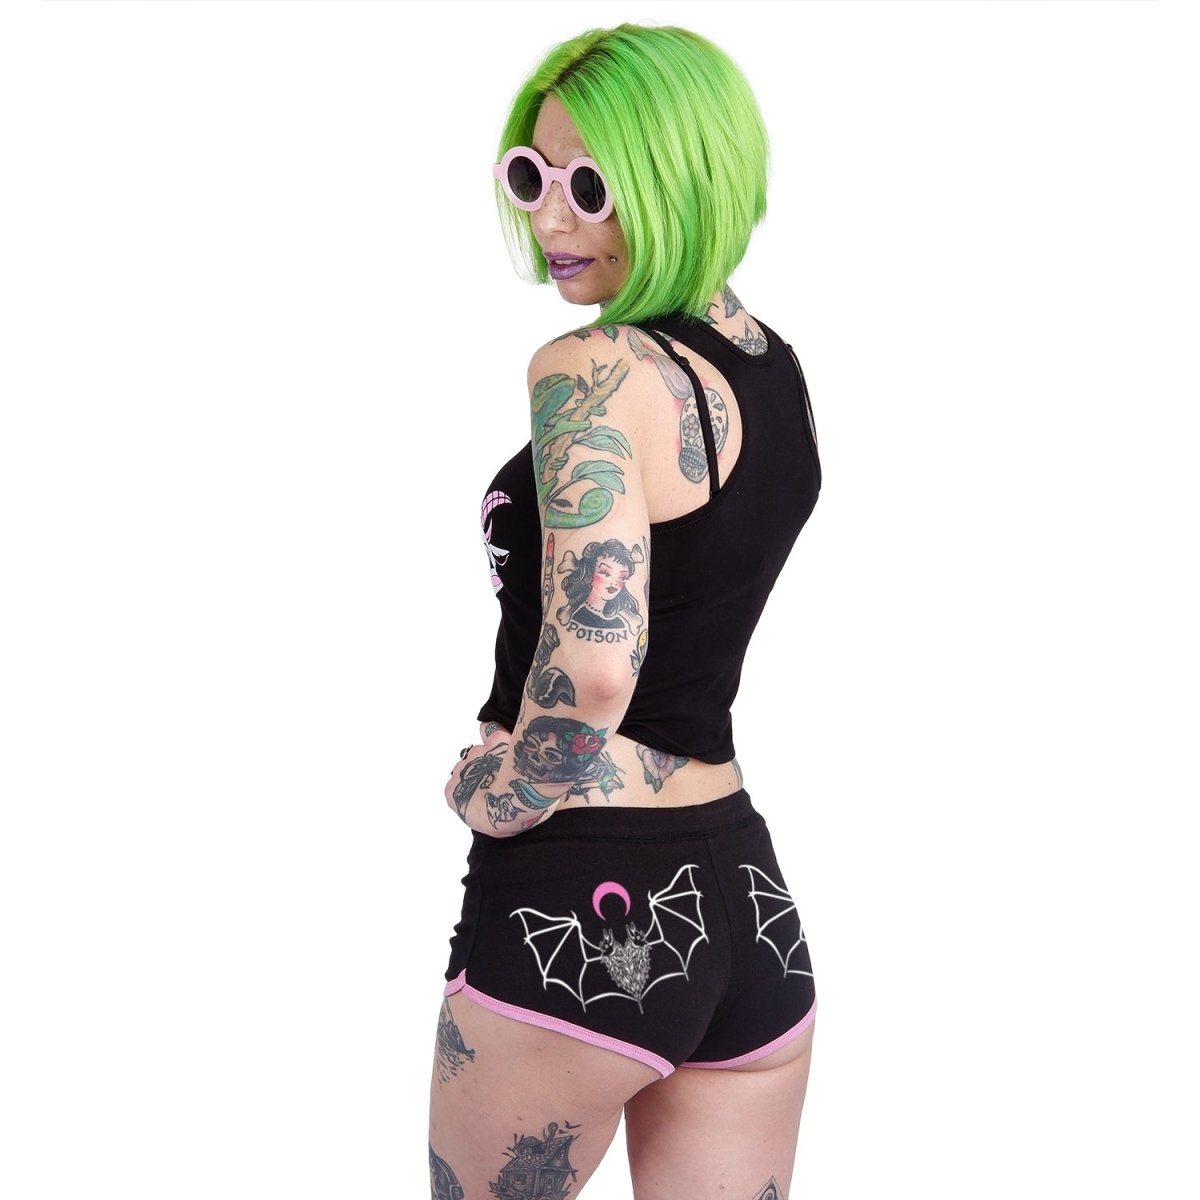 Too Fast | Two Headed Occult Bat Pink Trim Short Shorts